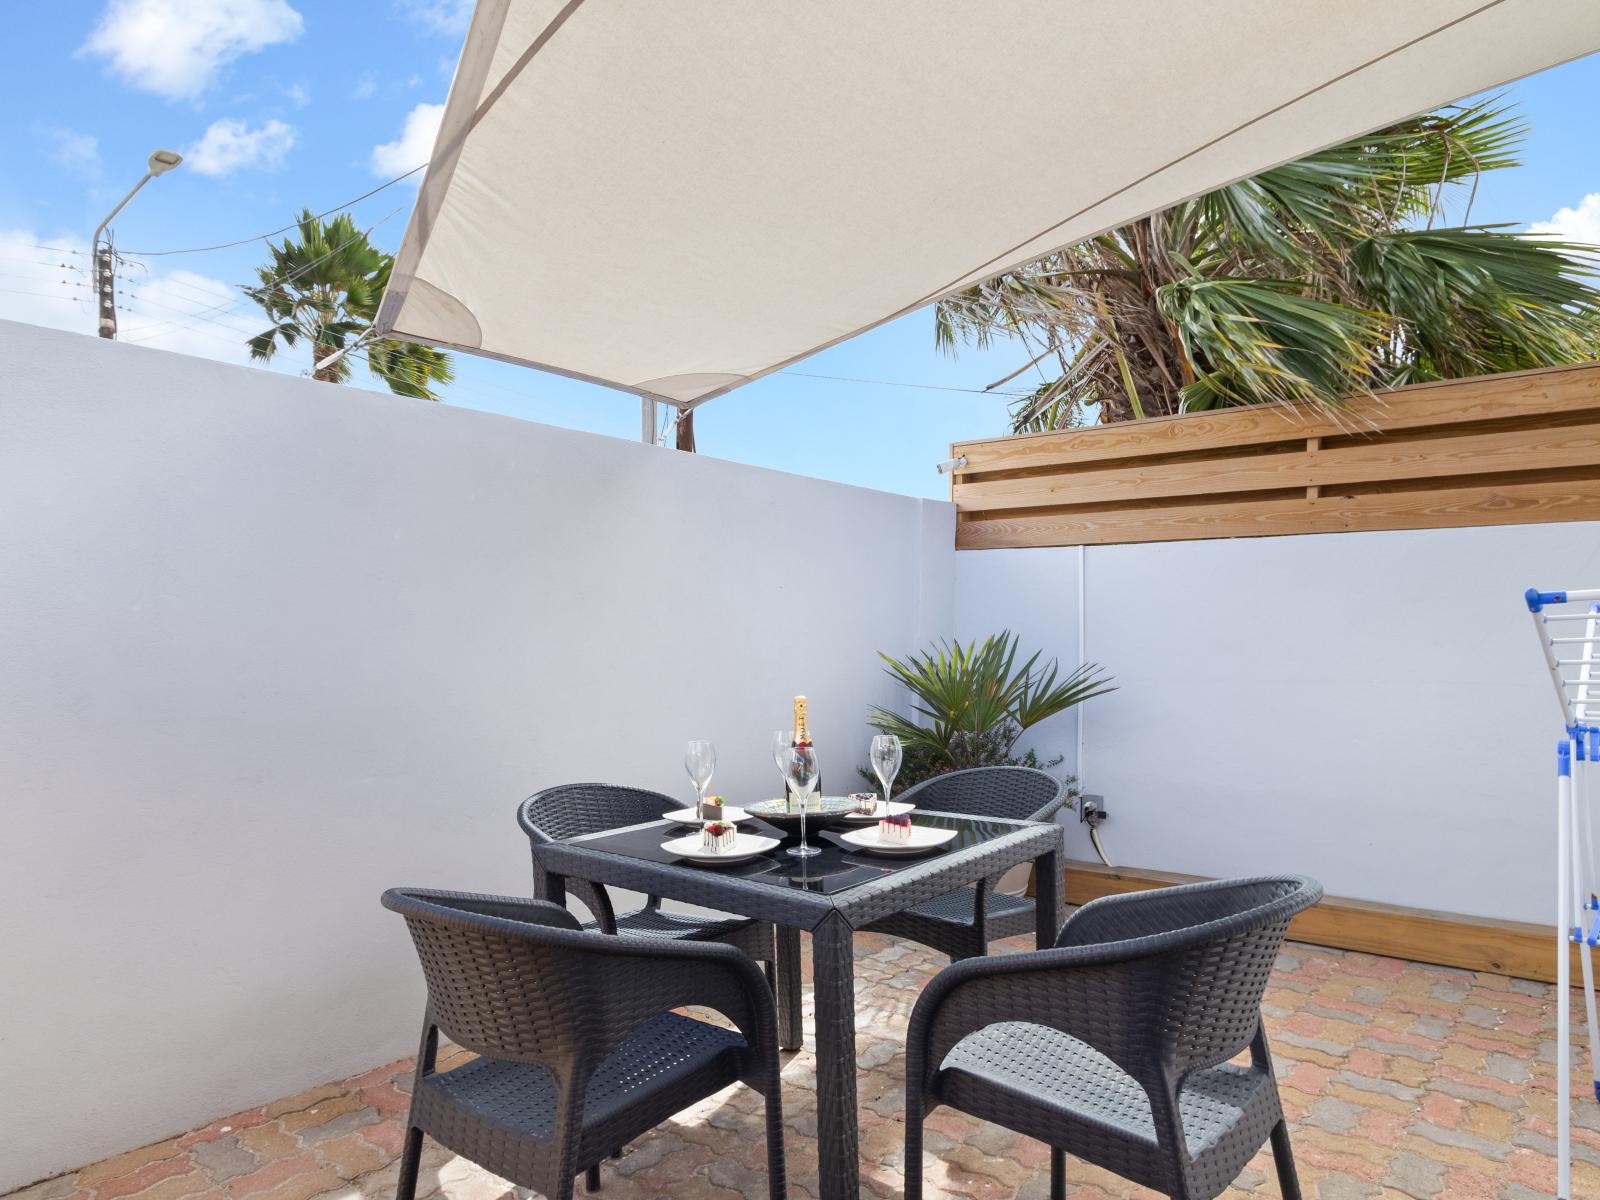 Private outside patio with cover for shade